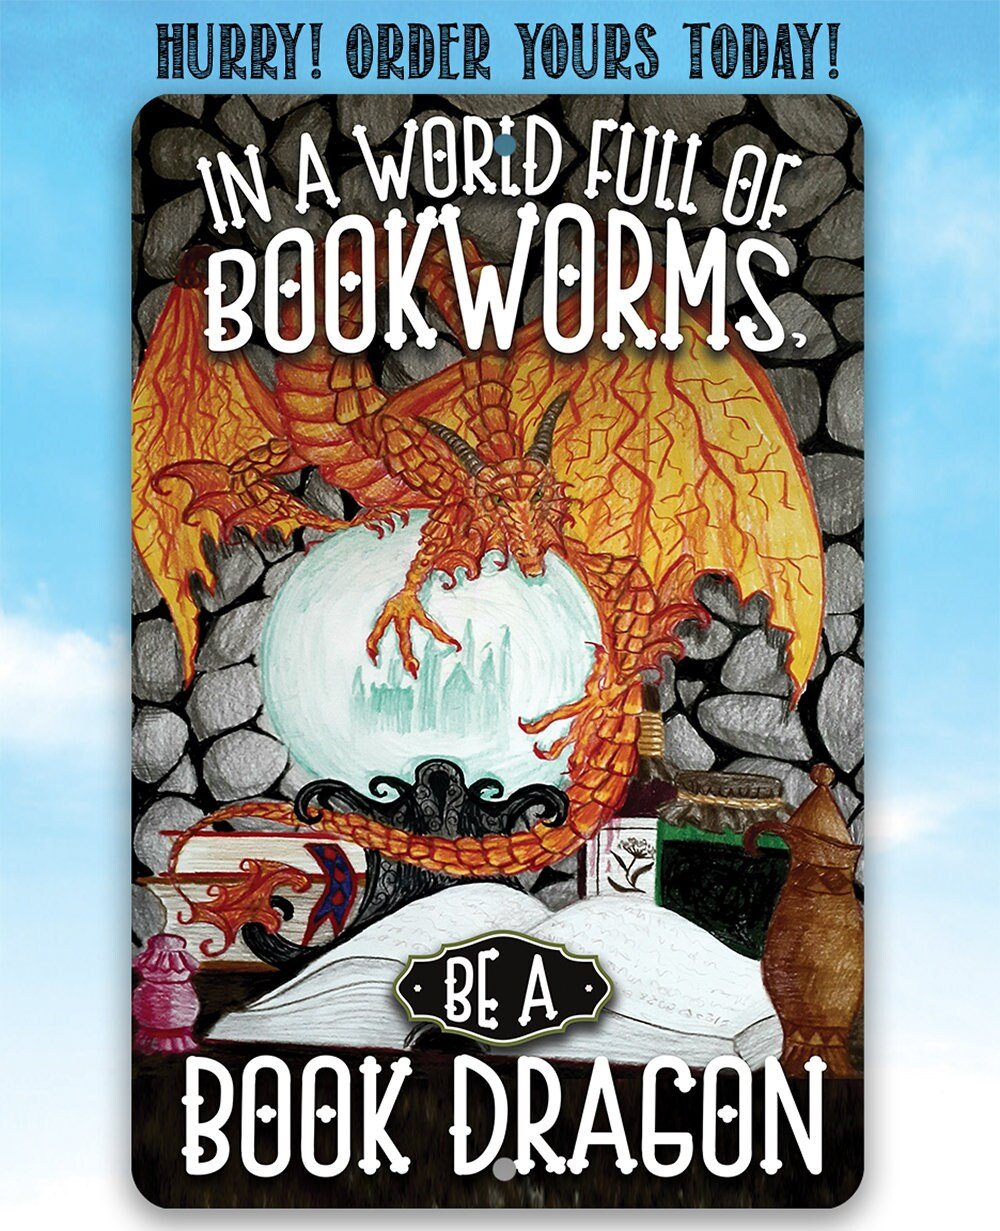 In A World Full Of Bookworms, Be A Dragon - 8" x 12" or 12" x 18" Aluminum Tin Awesome Metal Poster Lone Star Art 